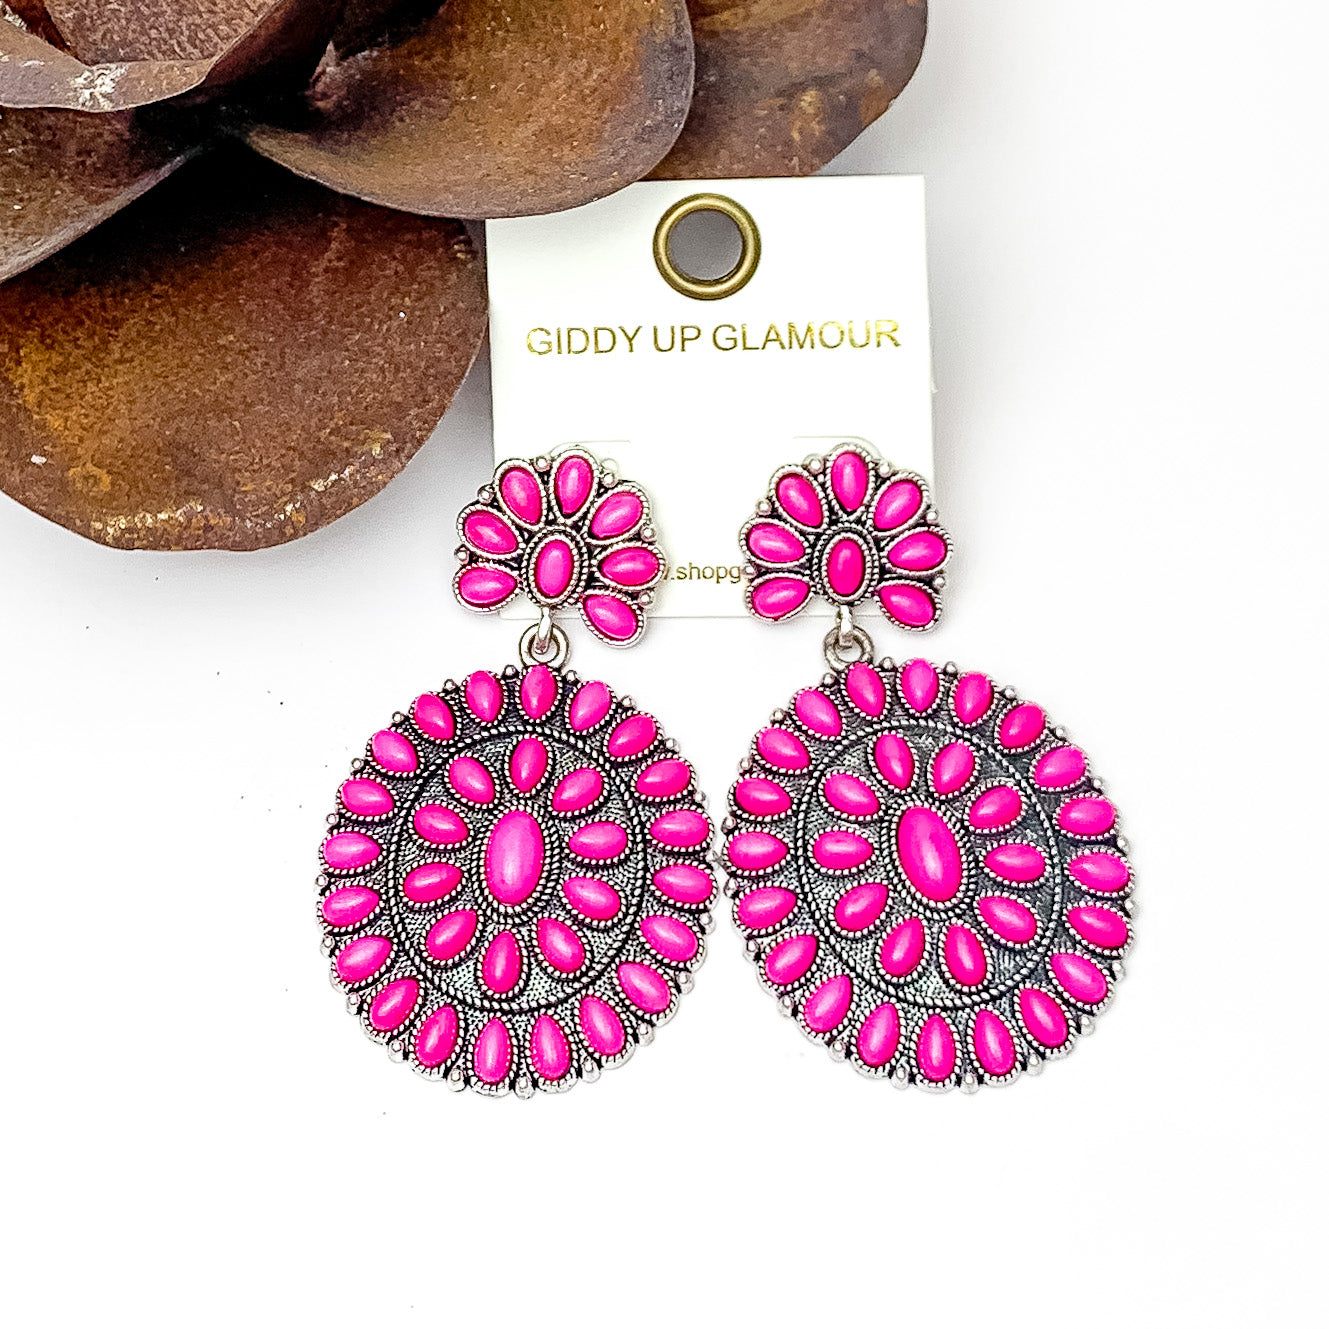 Double Cluster Western Earrings in Fuchsia. Pictured on a white background with a metal rose in the top let corner.